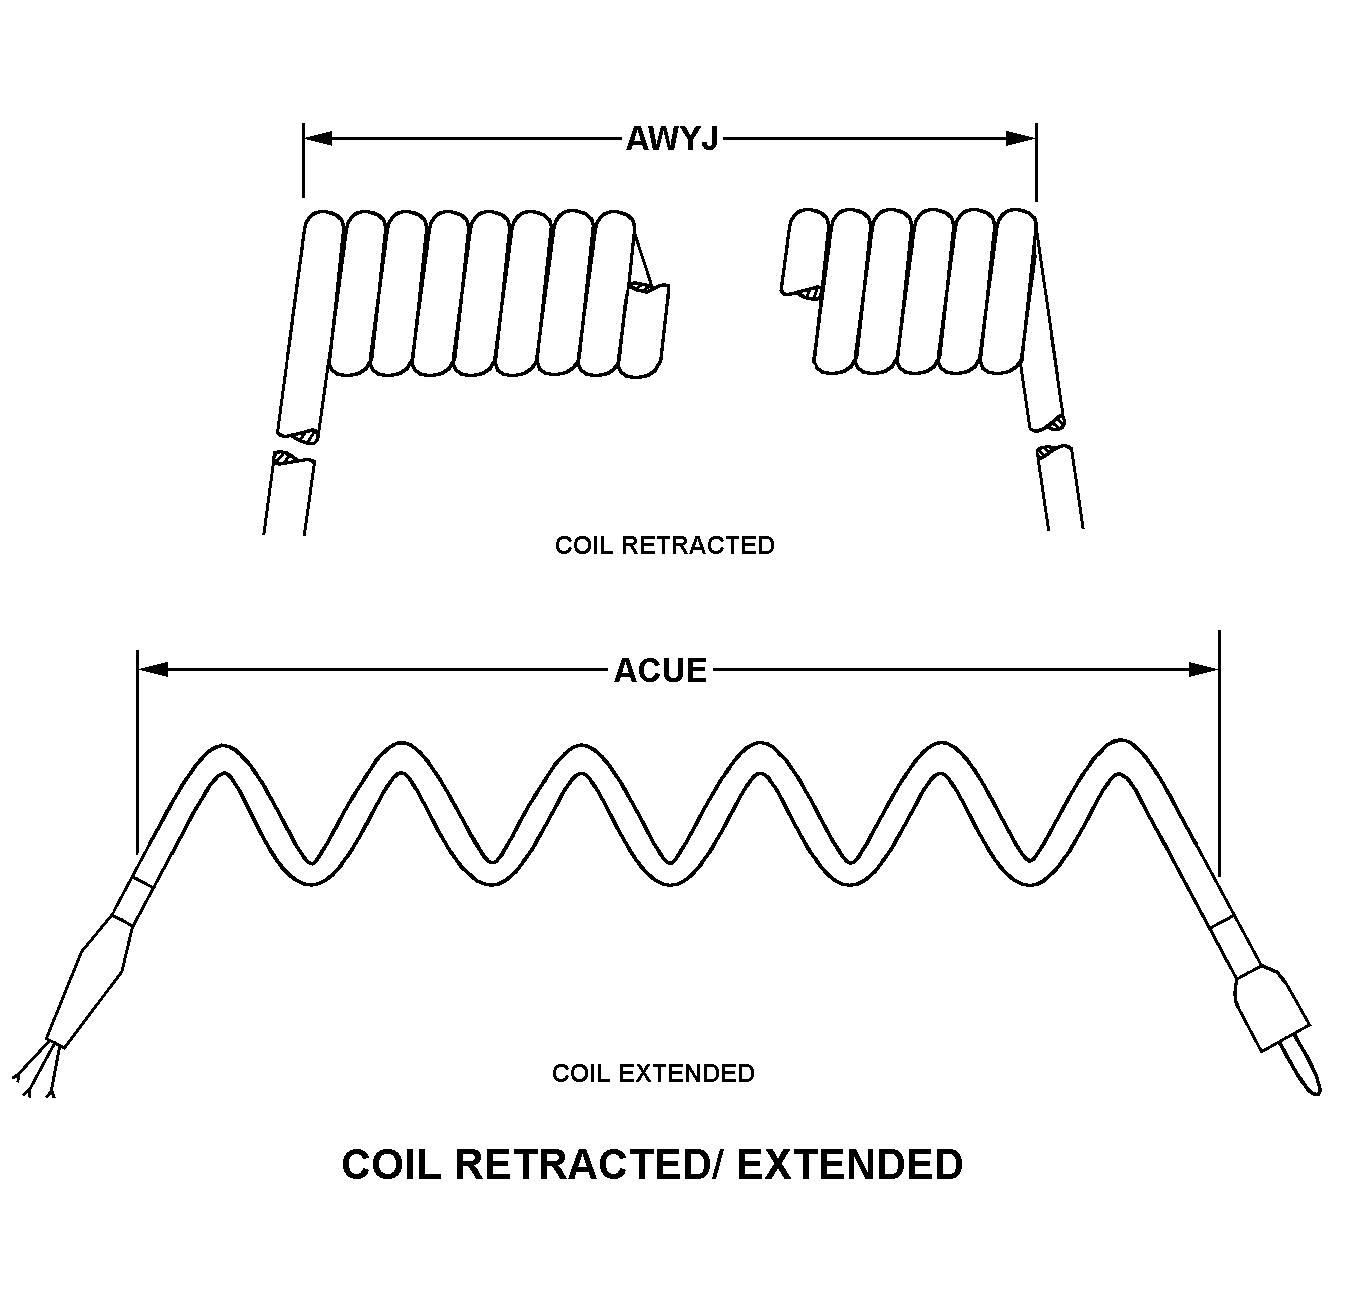 COIL RETRACTED/EXTENDED style nsn 6150-01-035-6855